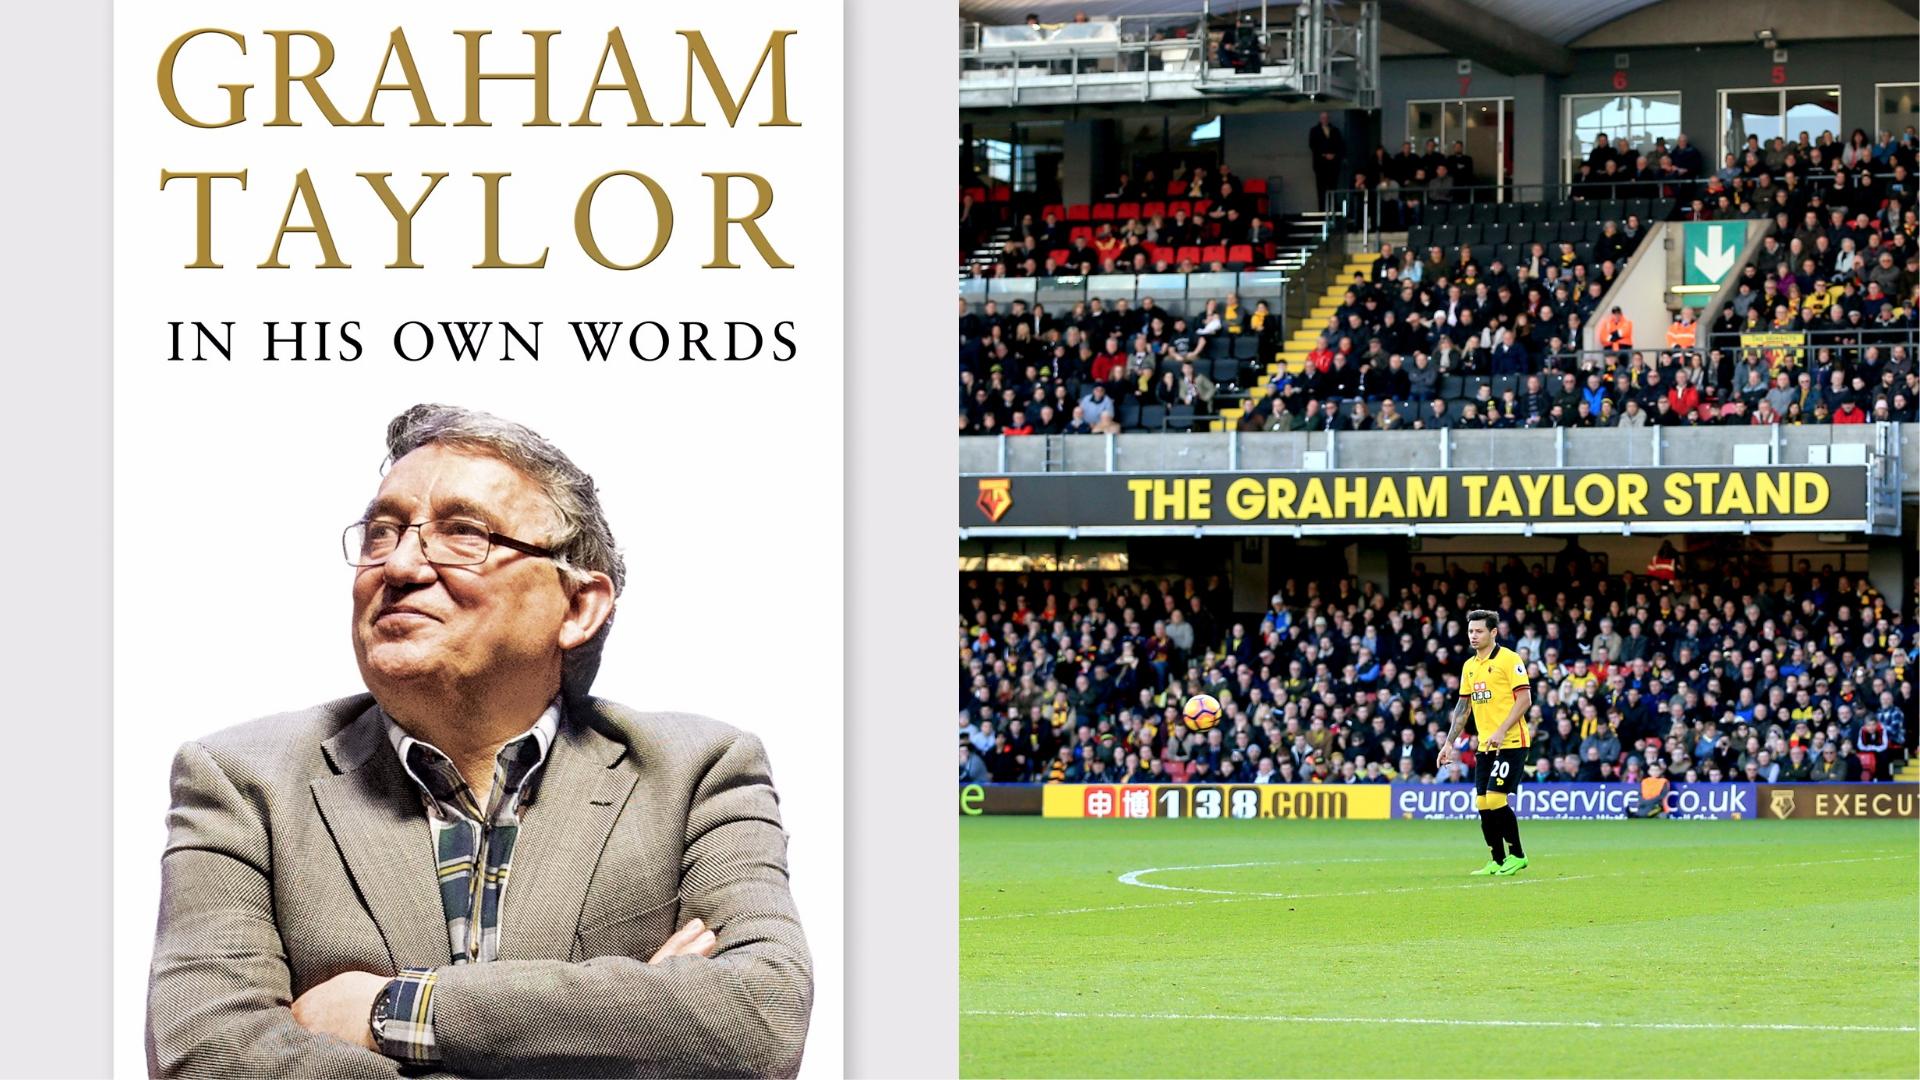 Graham Taylor's autobiography and an image of the Graham Taylor stand at Vicarage Road